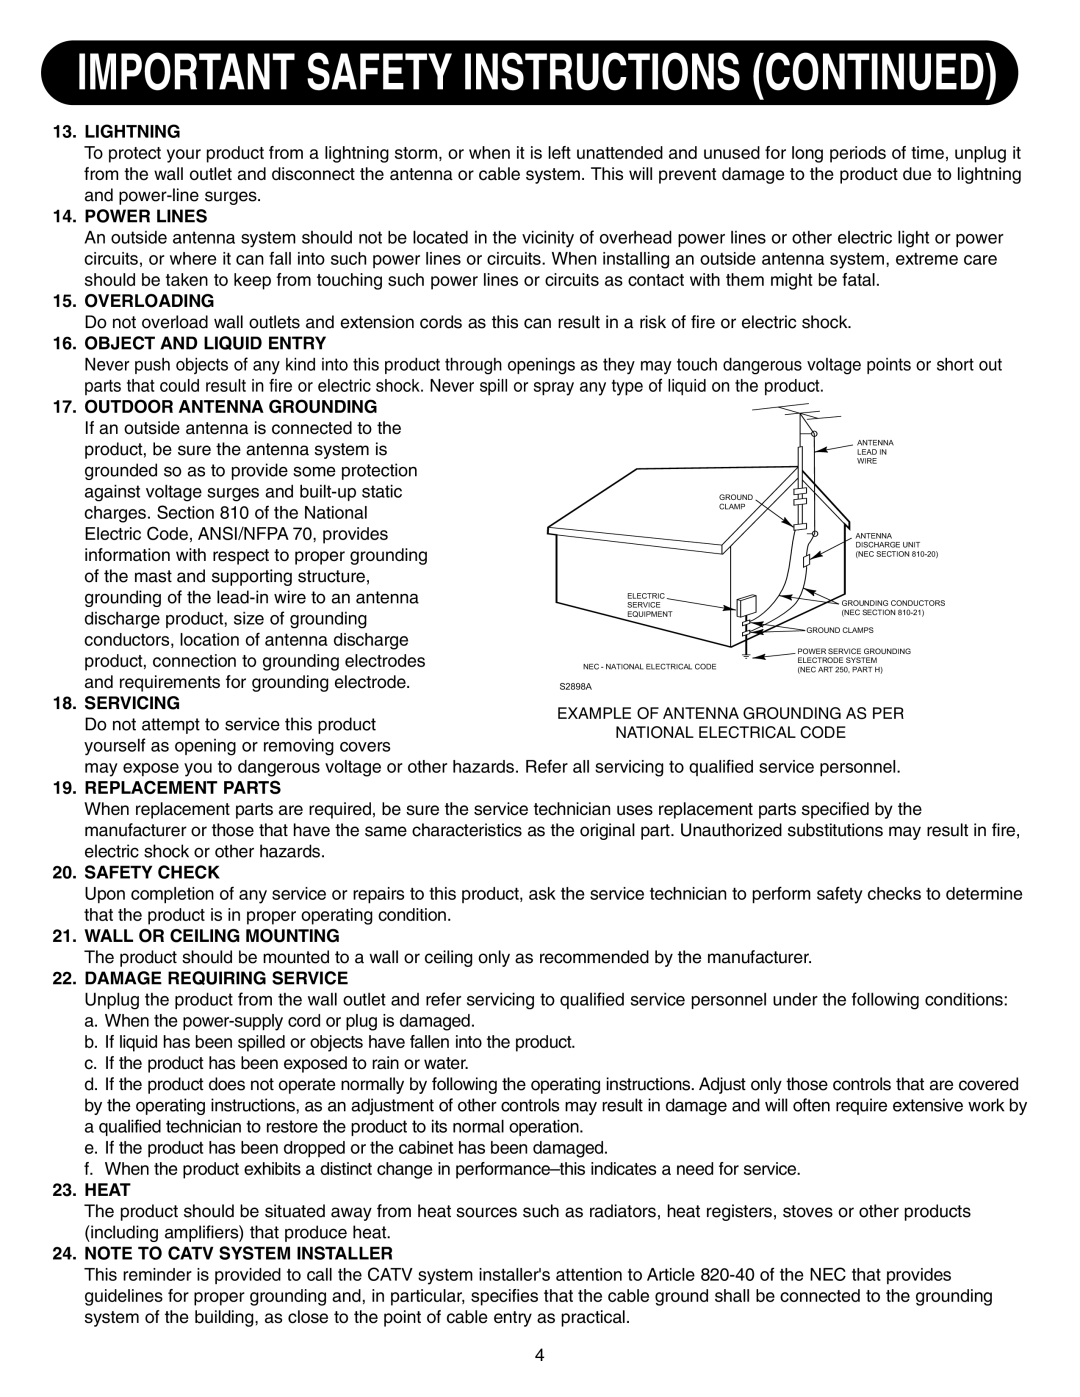 Emerson SB315 manual Important Safety Instructions Continued 